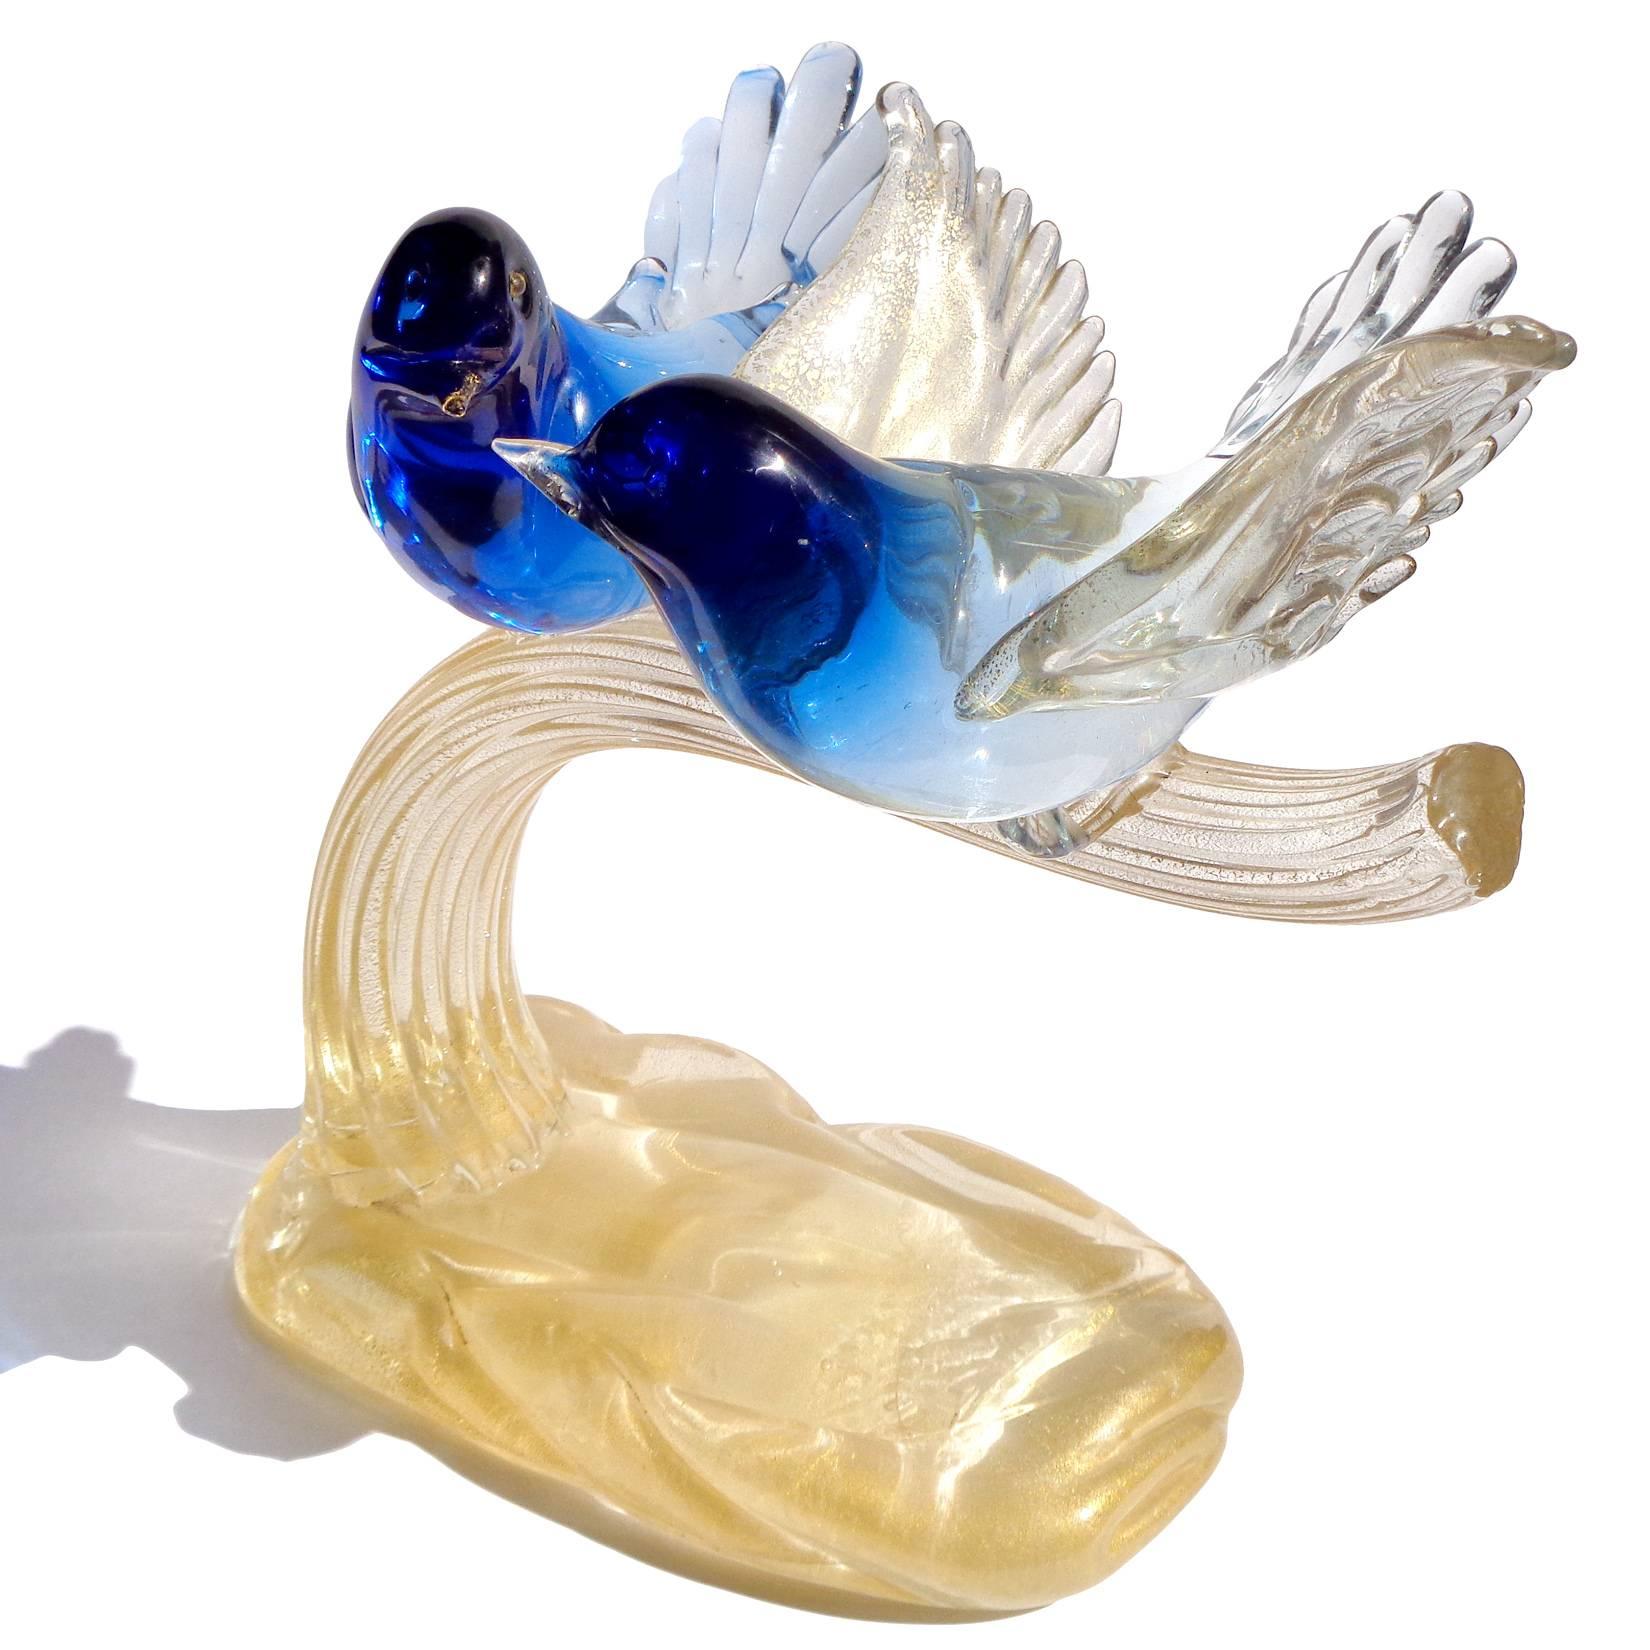 Free shipping worldwide! See details below description.

Gorgeous Murano handblown, cobalt blue Sommerso and gold flecks art glass love birds on branch. Documented to designer Alfredo Barbini. The piece is profusely covered in gold leaf, along